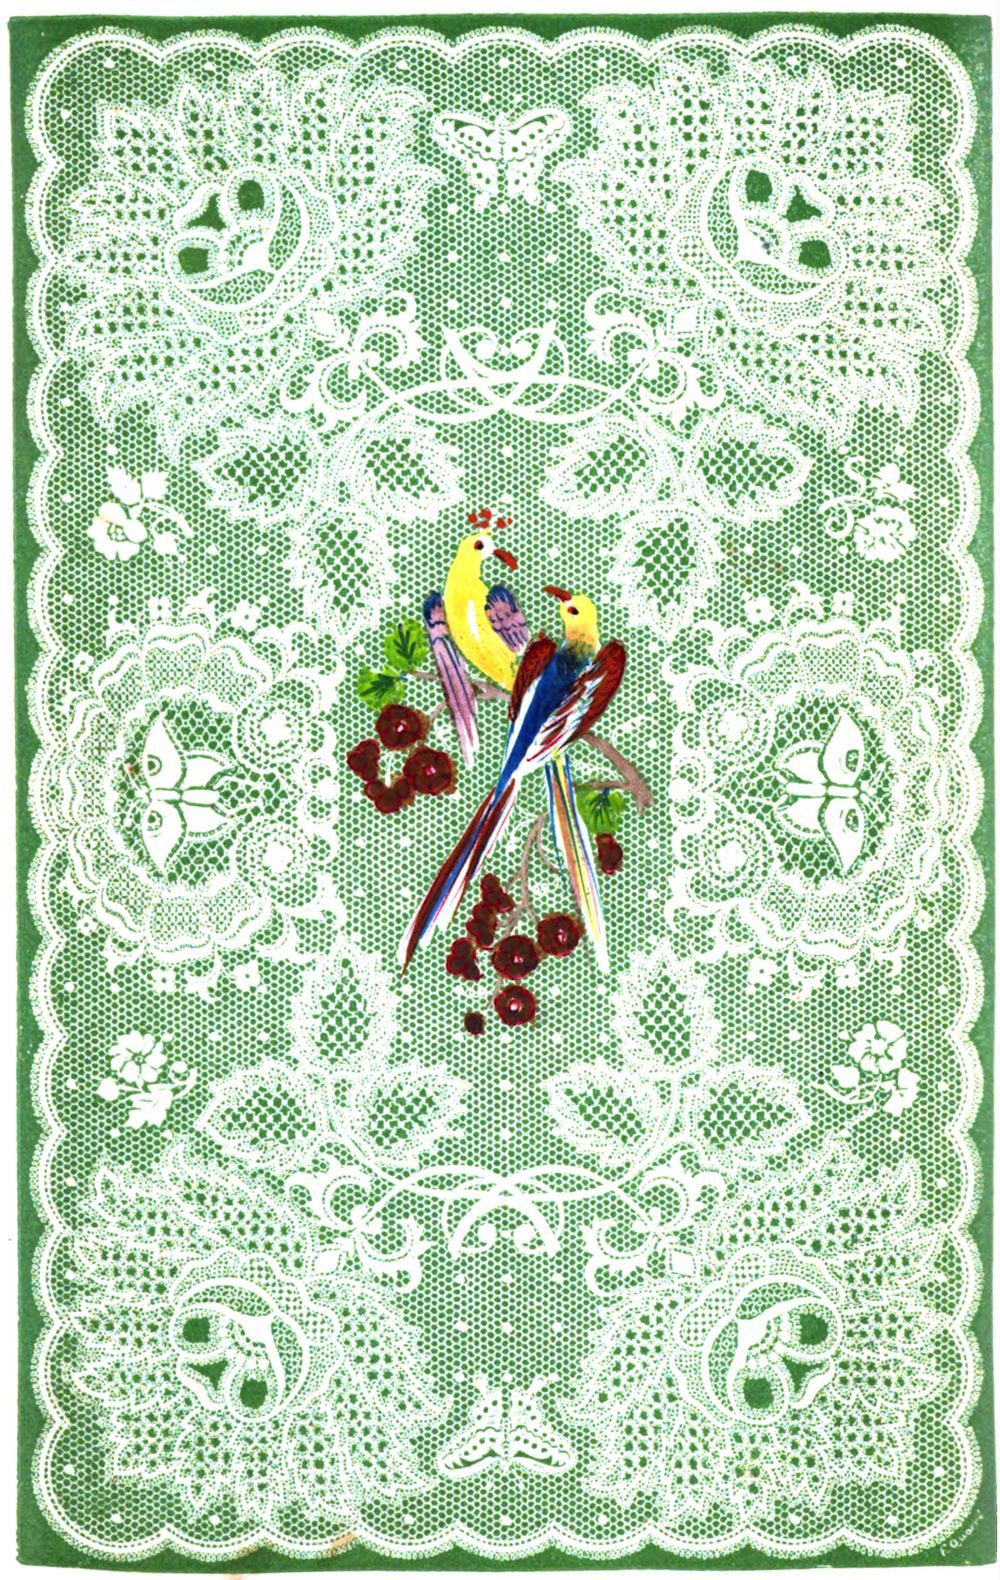 lace work with colored birds in center